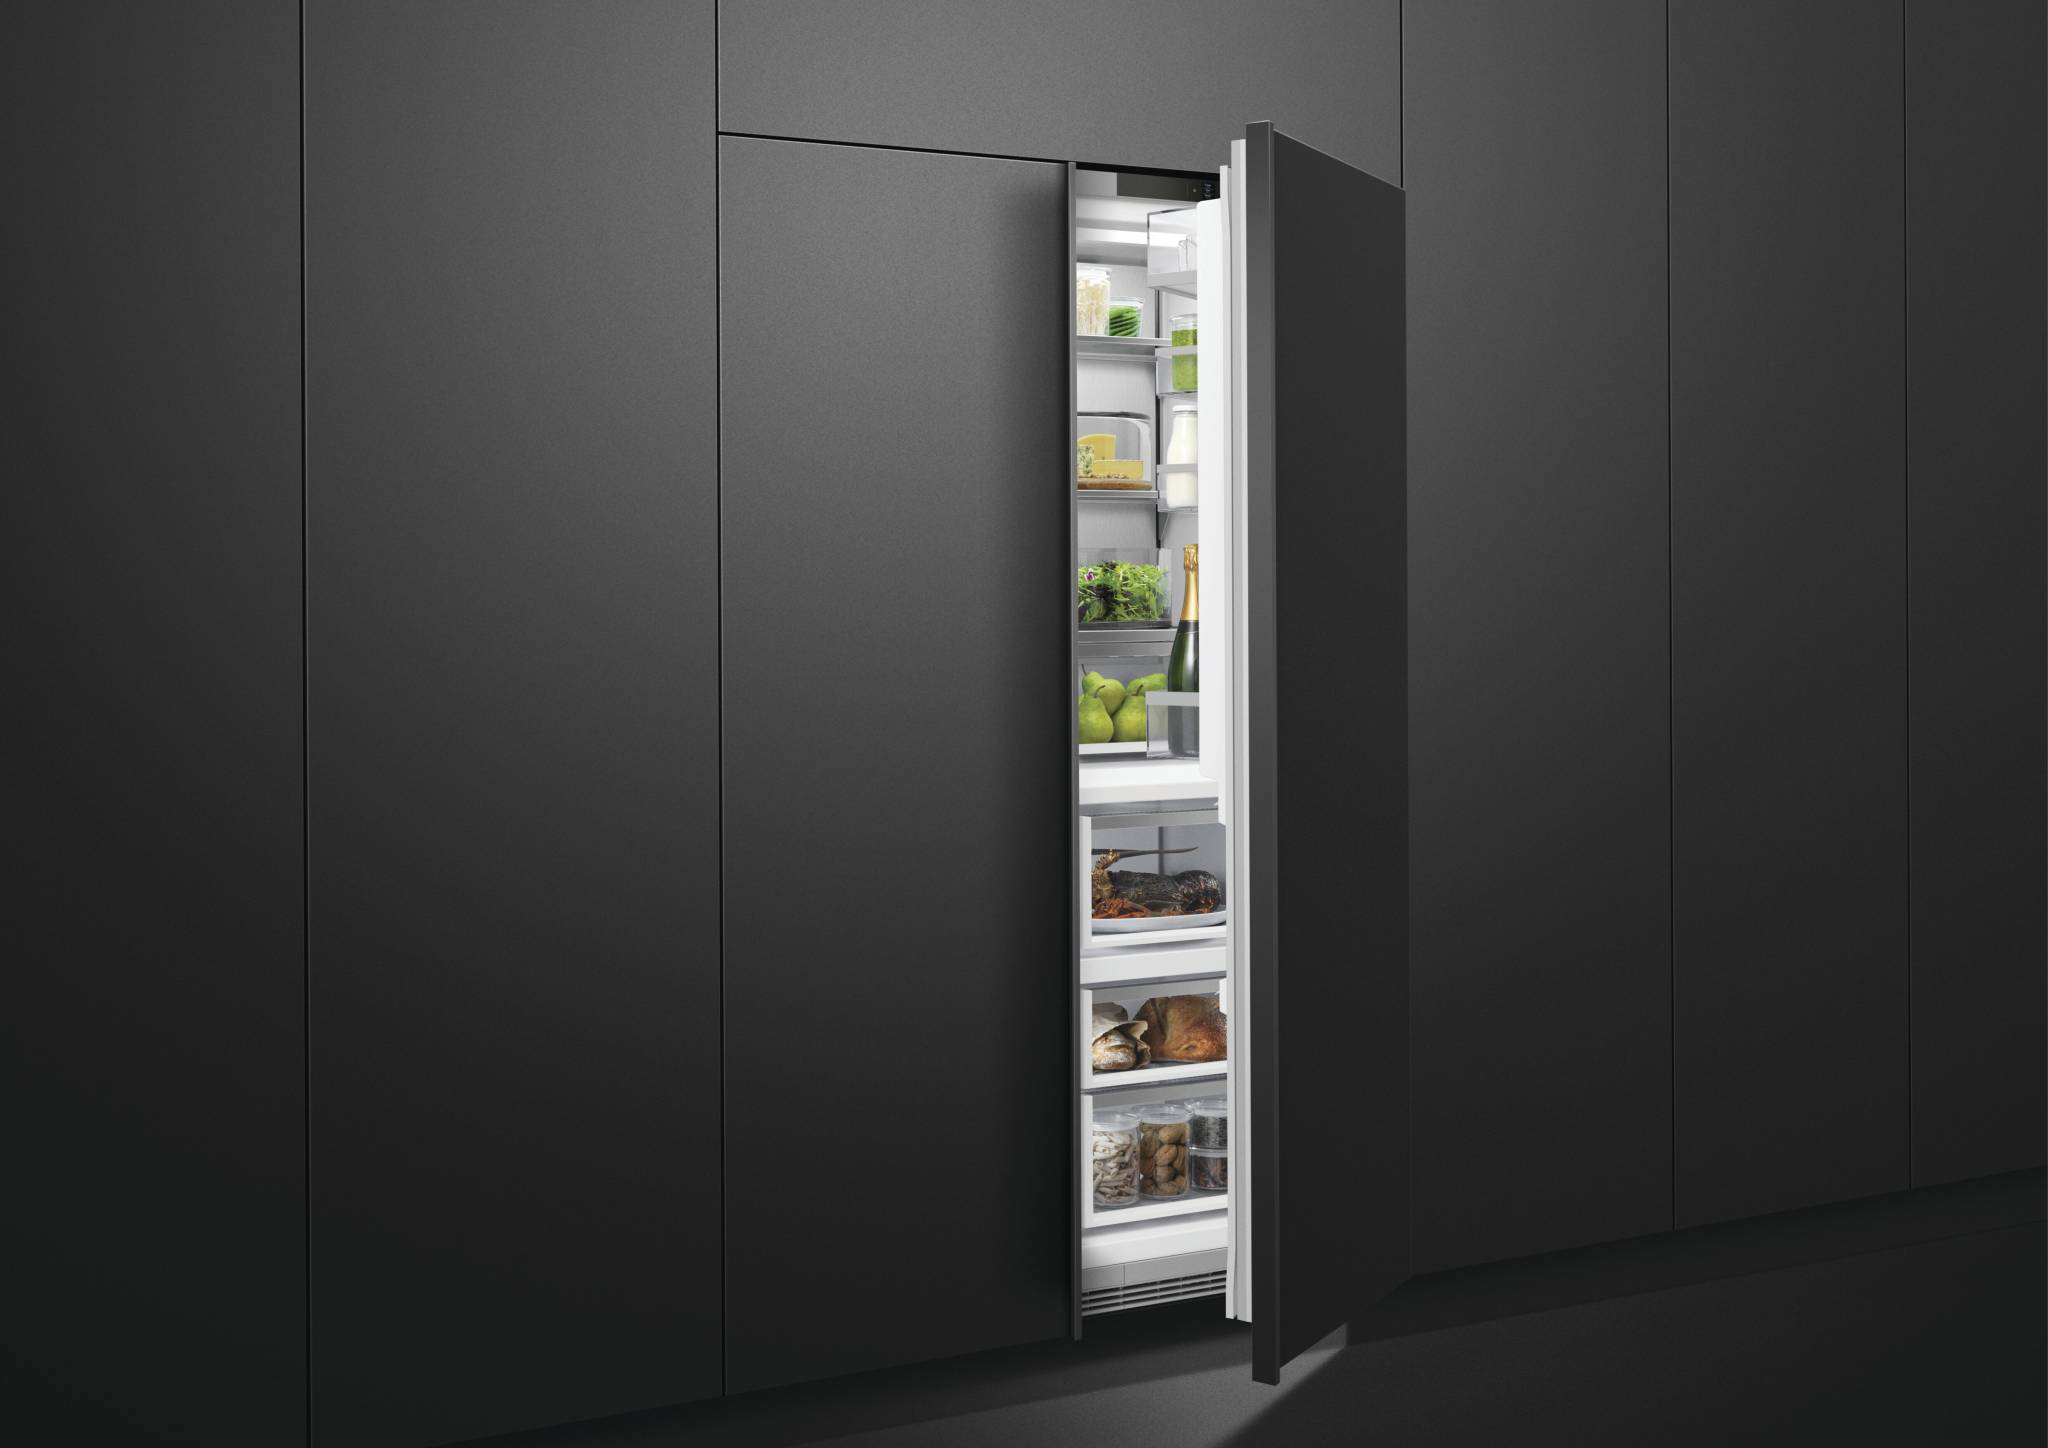 Fisher & Paykel introduces new triple zone cooling technology